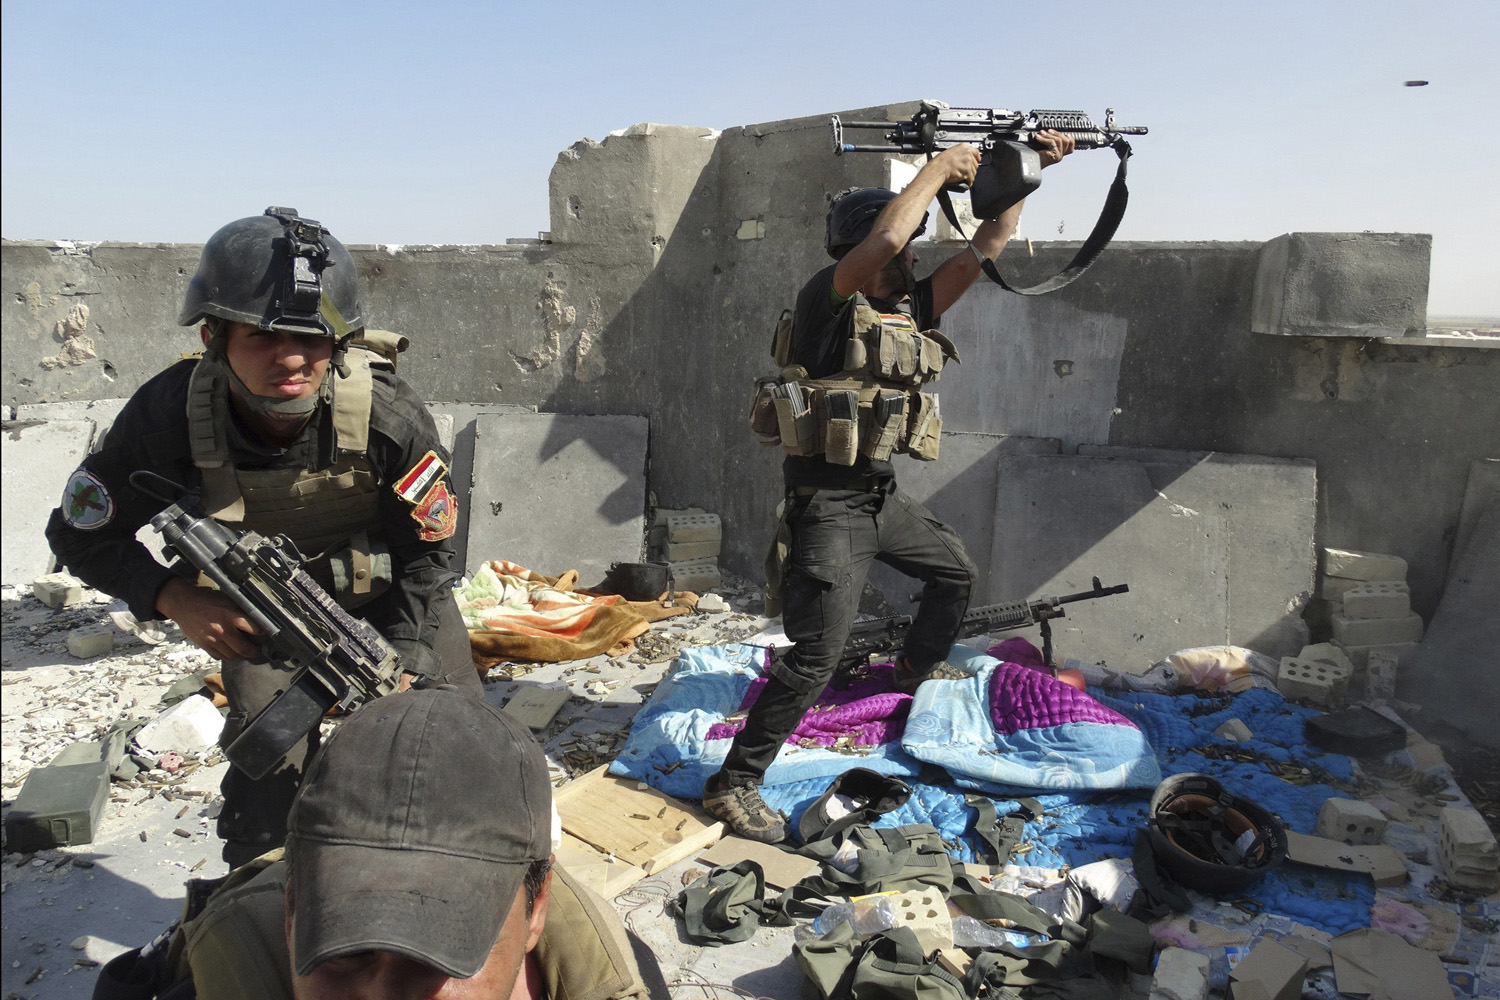 Members of the Iraqi Special Operations Forces take their positions during clashes with the al Qaeda-linked Islamic State of Iraq and the Levant (ISIL) in the city of Ramadi